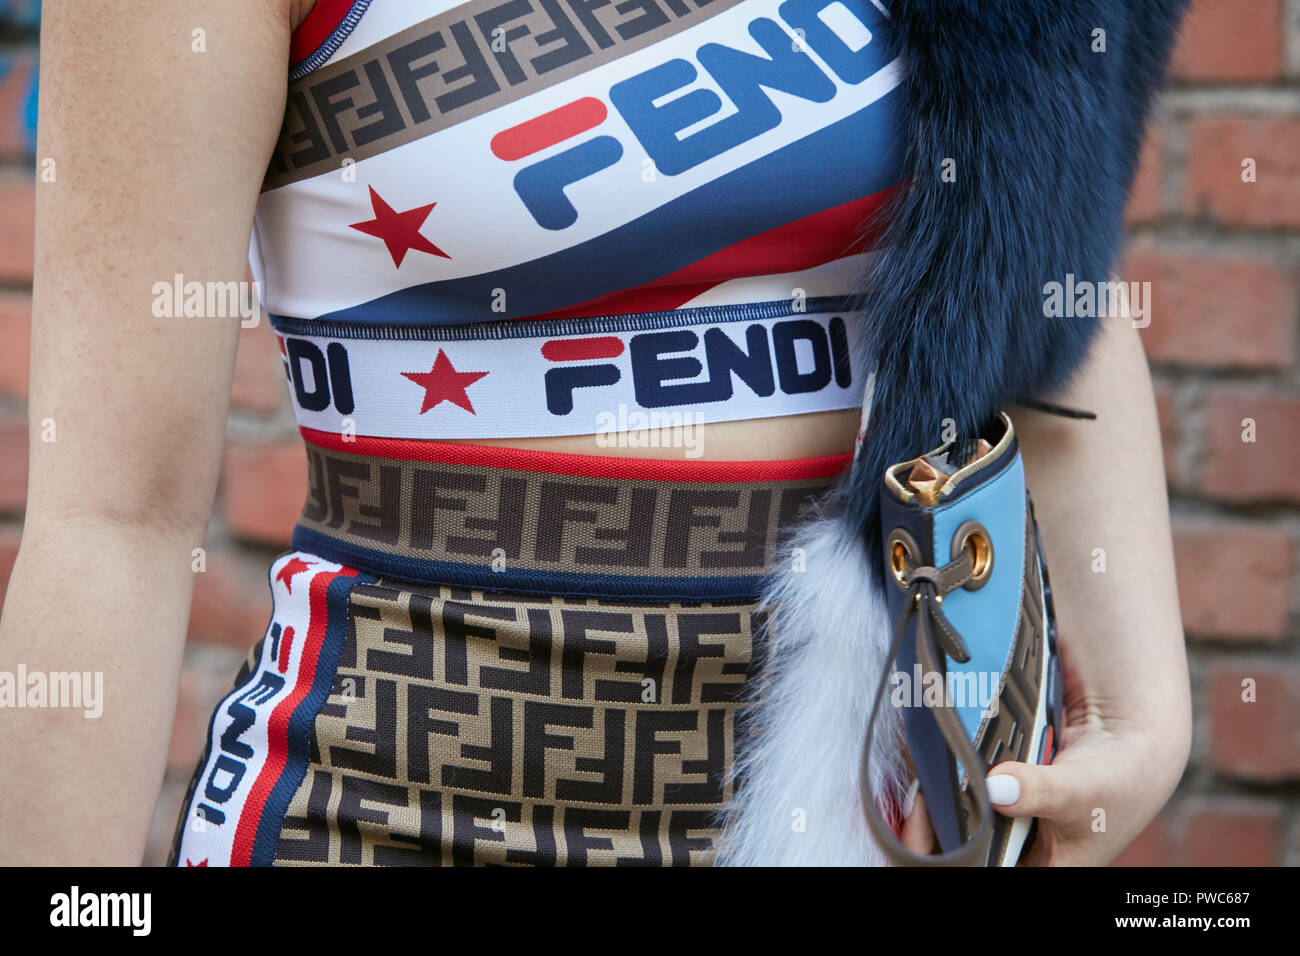 fendi red white and blue